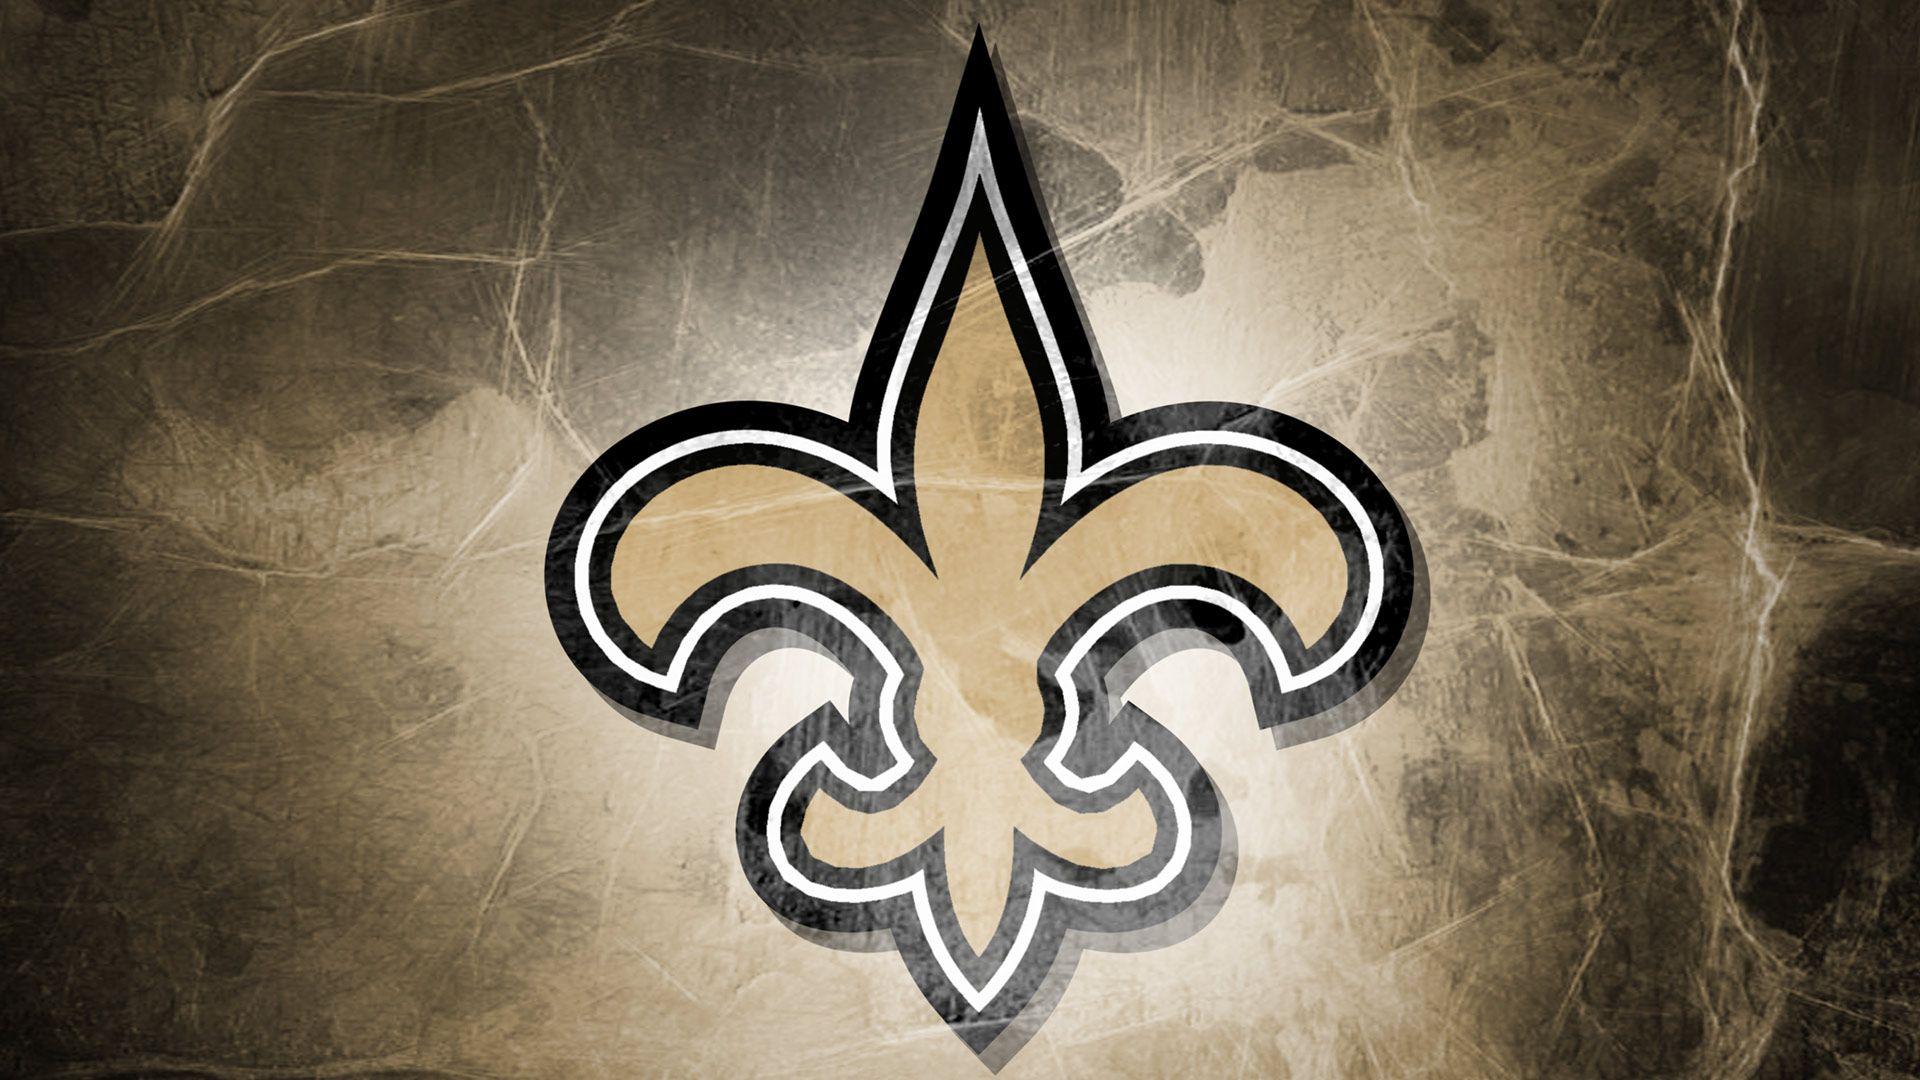 New Orleans Saints wallpapers – Free full hd wallpapers for 1080p